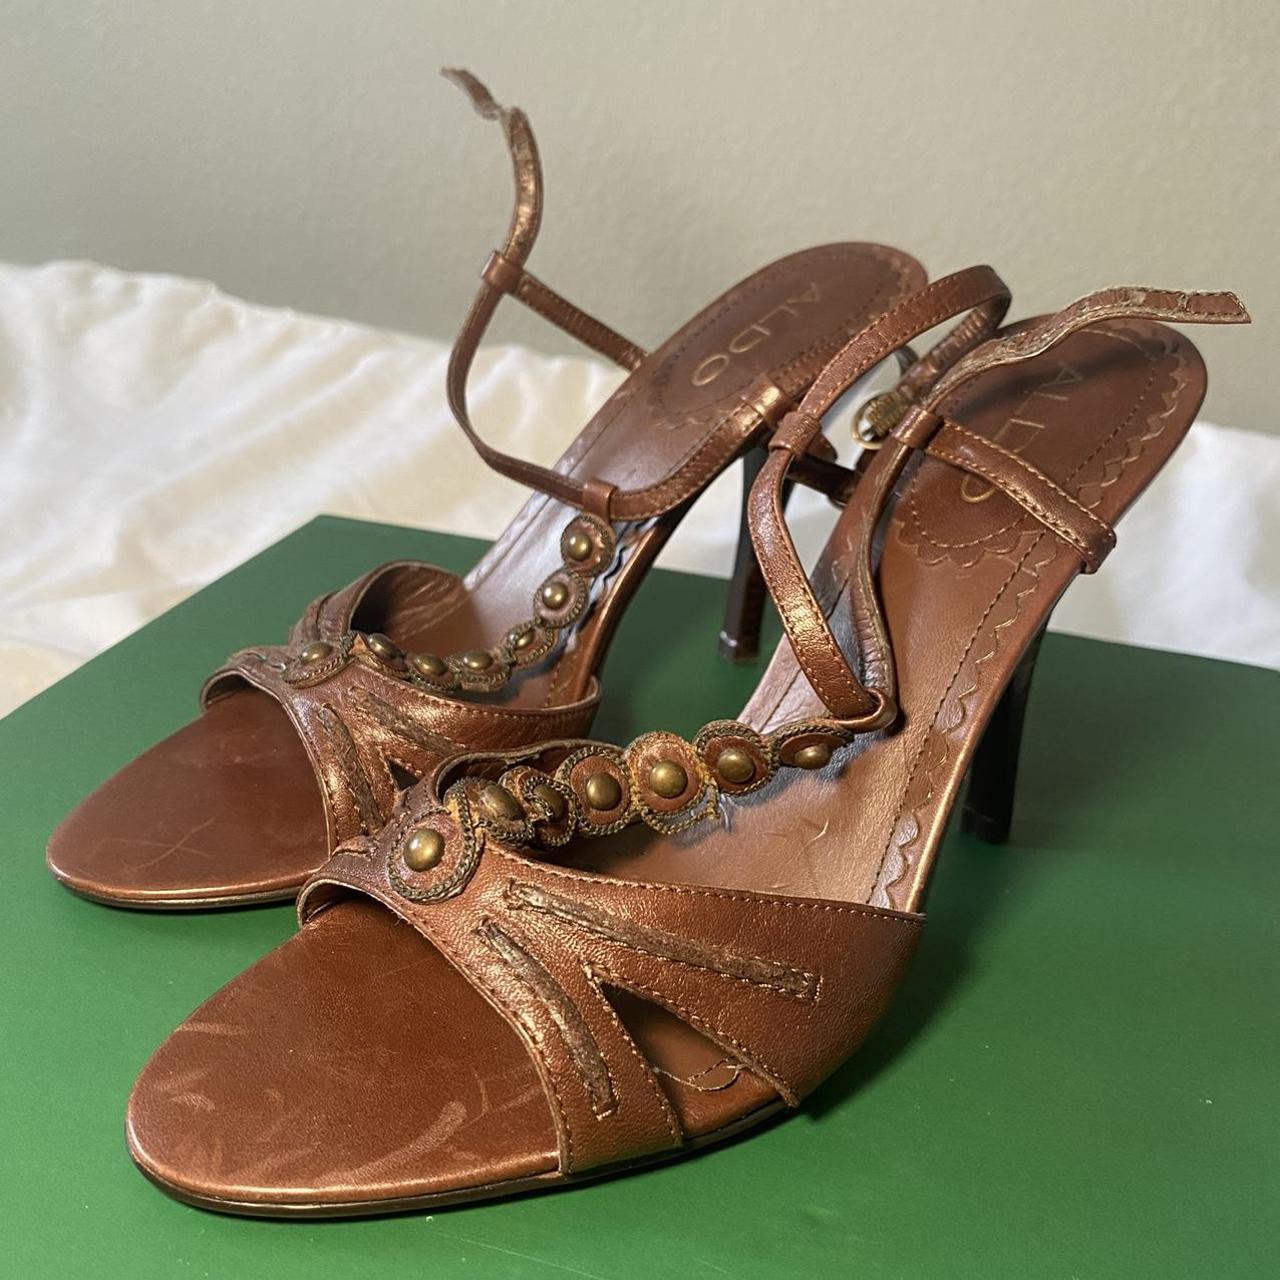 Brown Aldo Heels Size 6 1/2 US Used The leather is... Depop